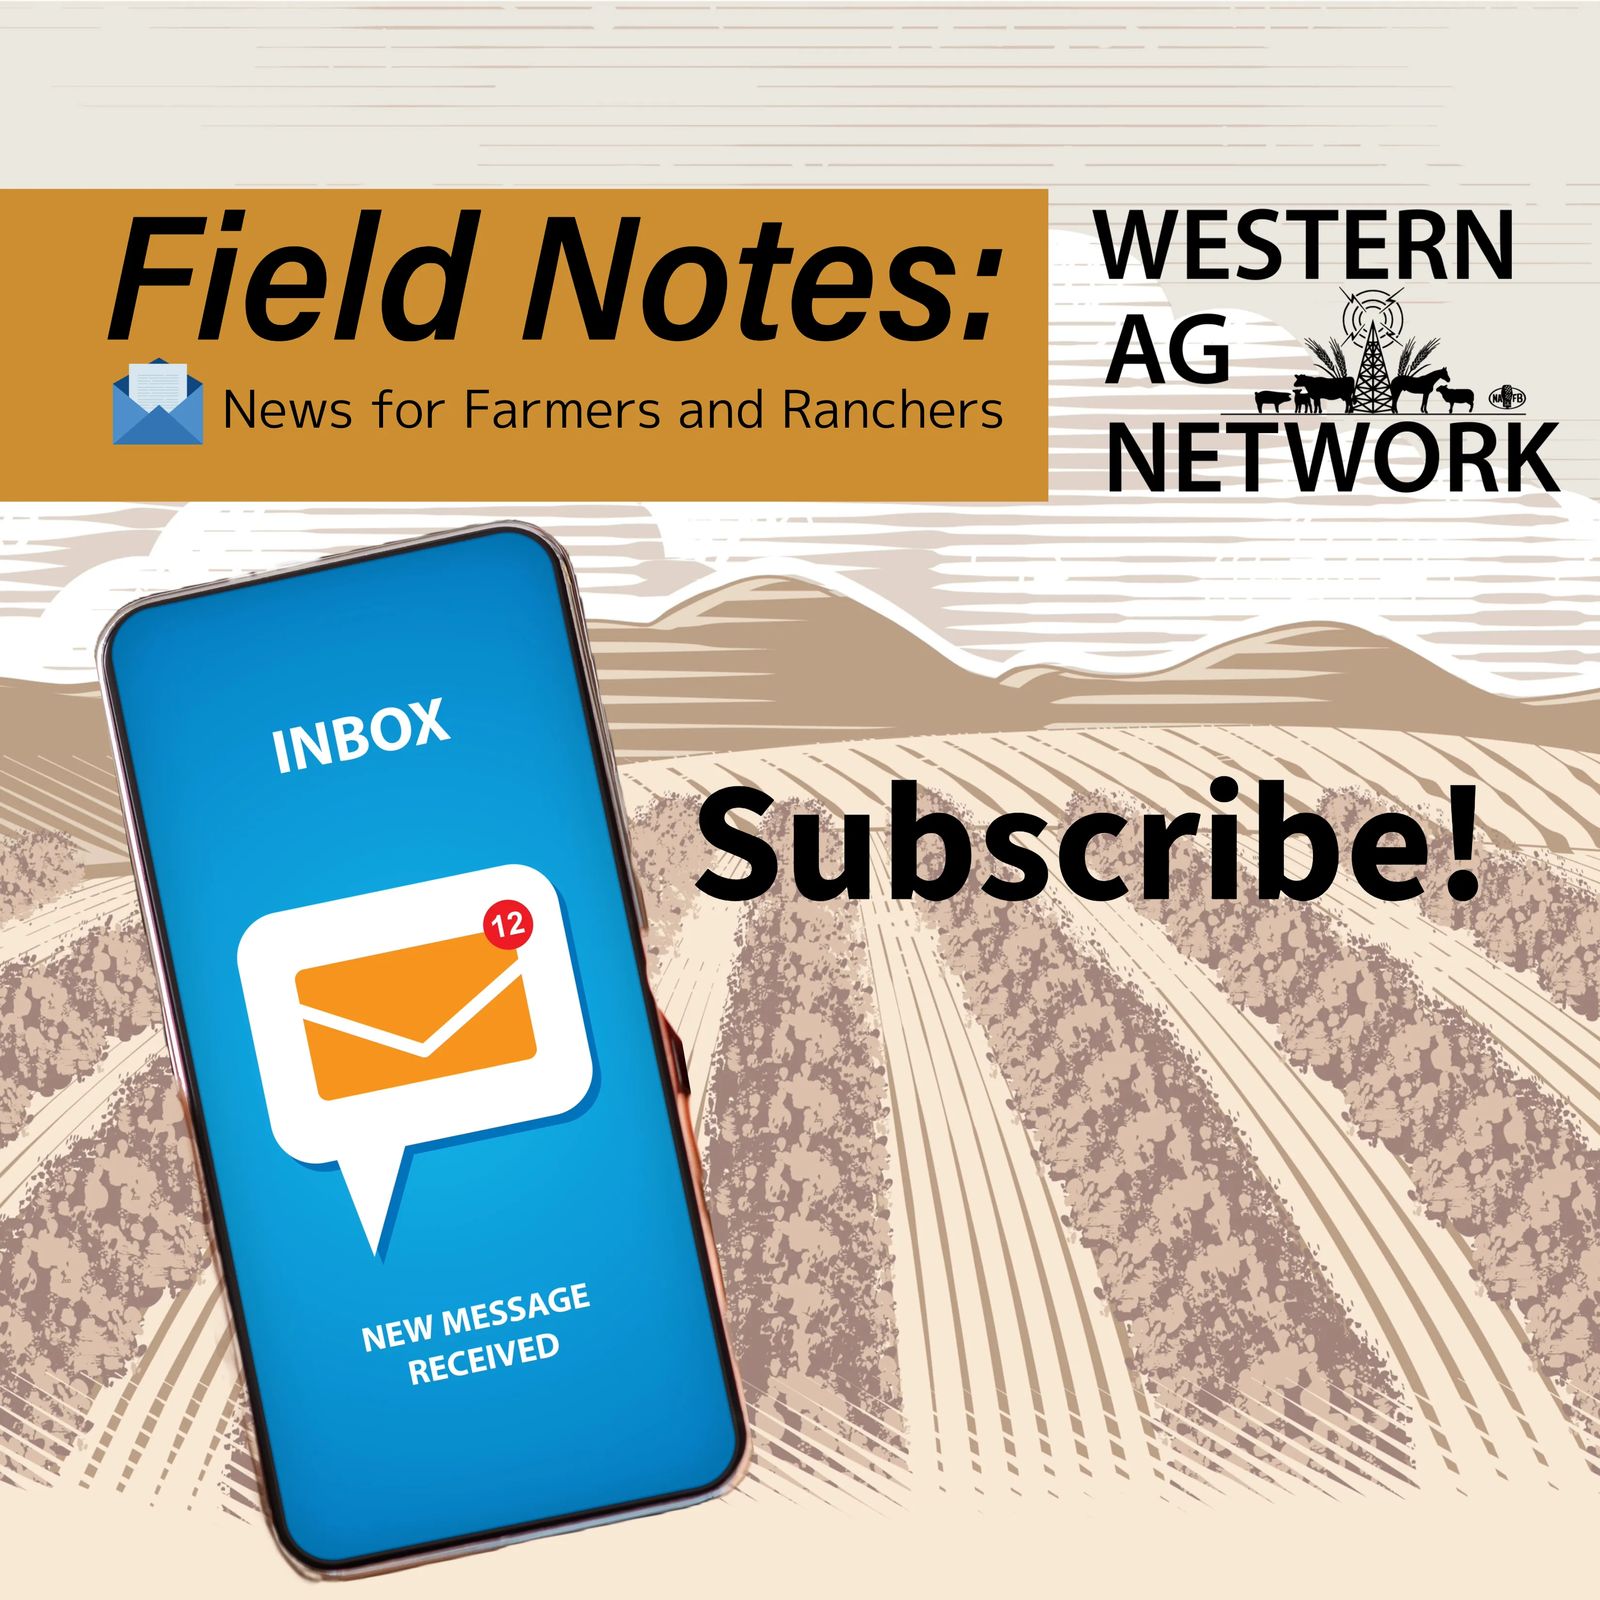 Sign up for field notes.